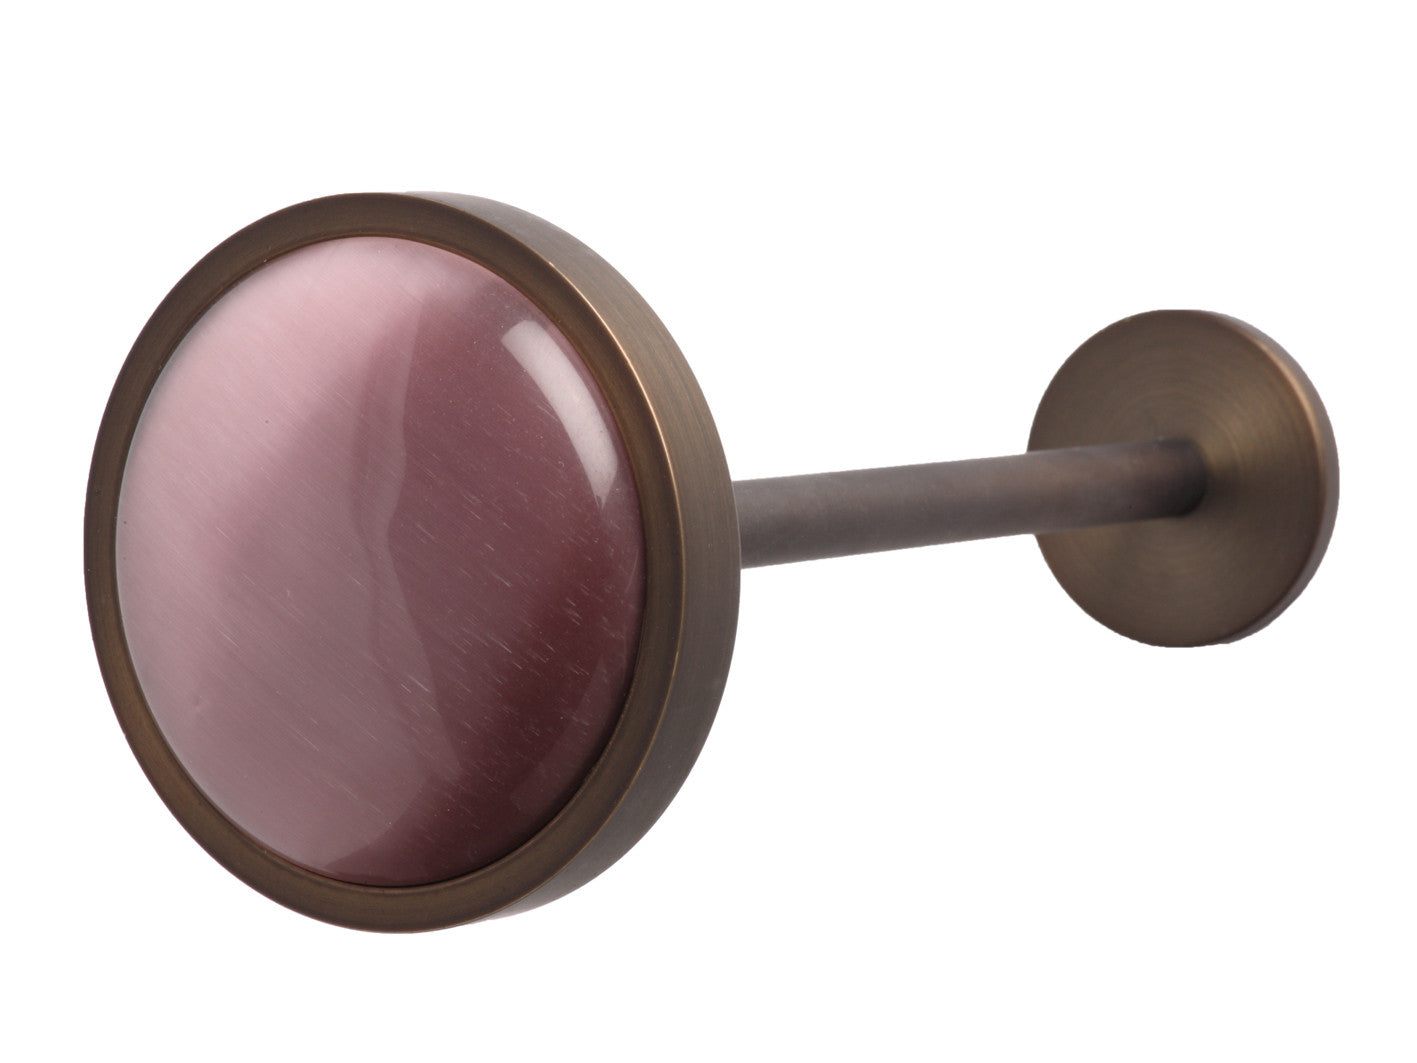 Crocus pink glass moonstone tieback in bronze | Walcot House curtain hold back collection